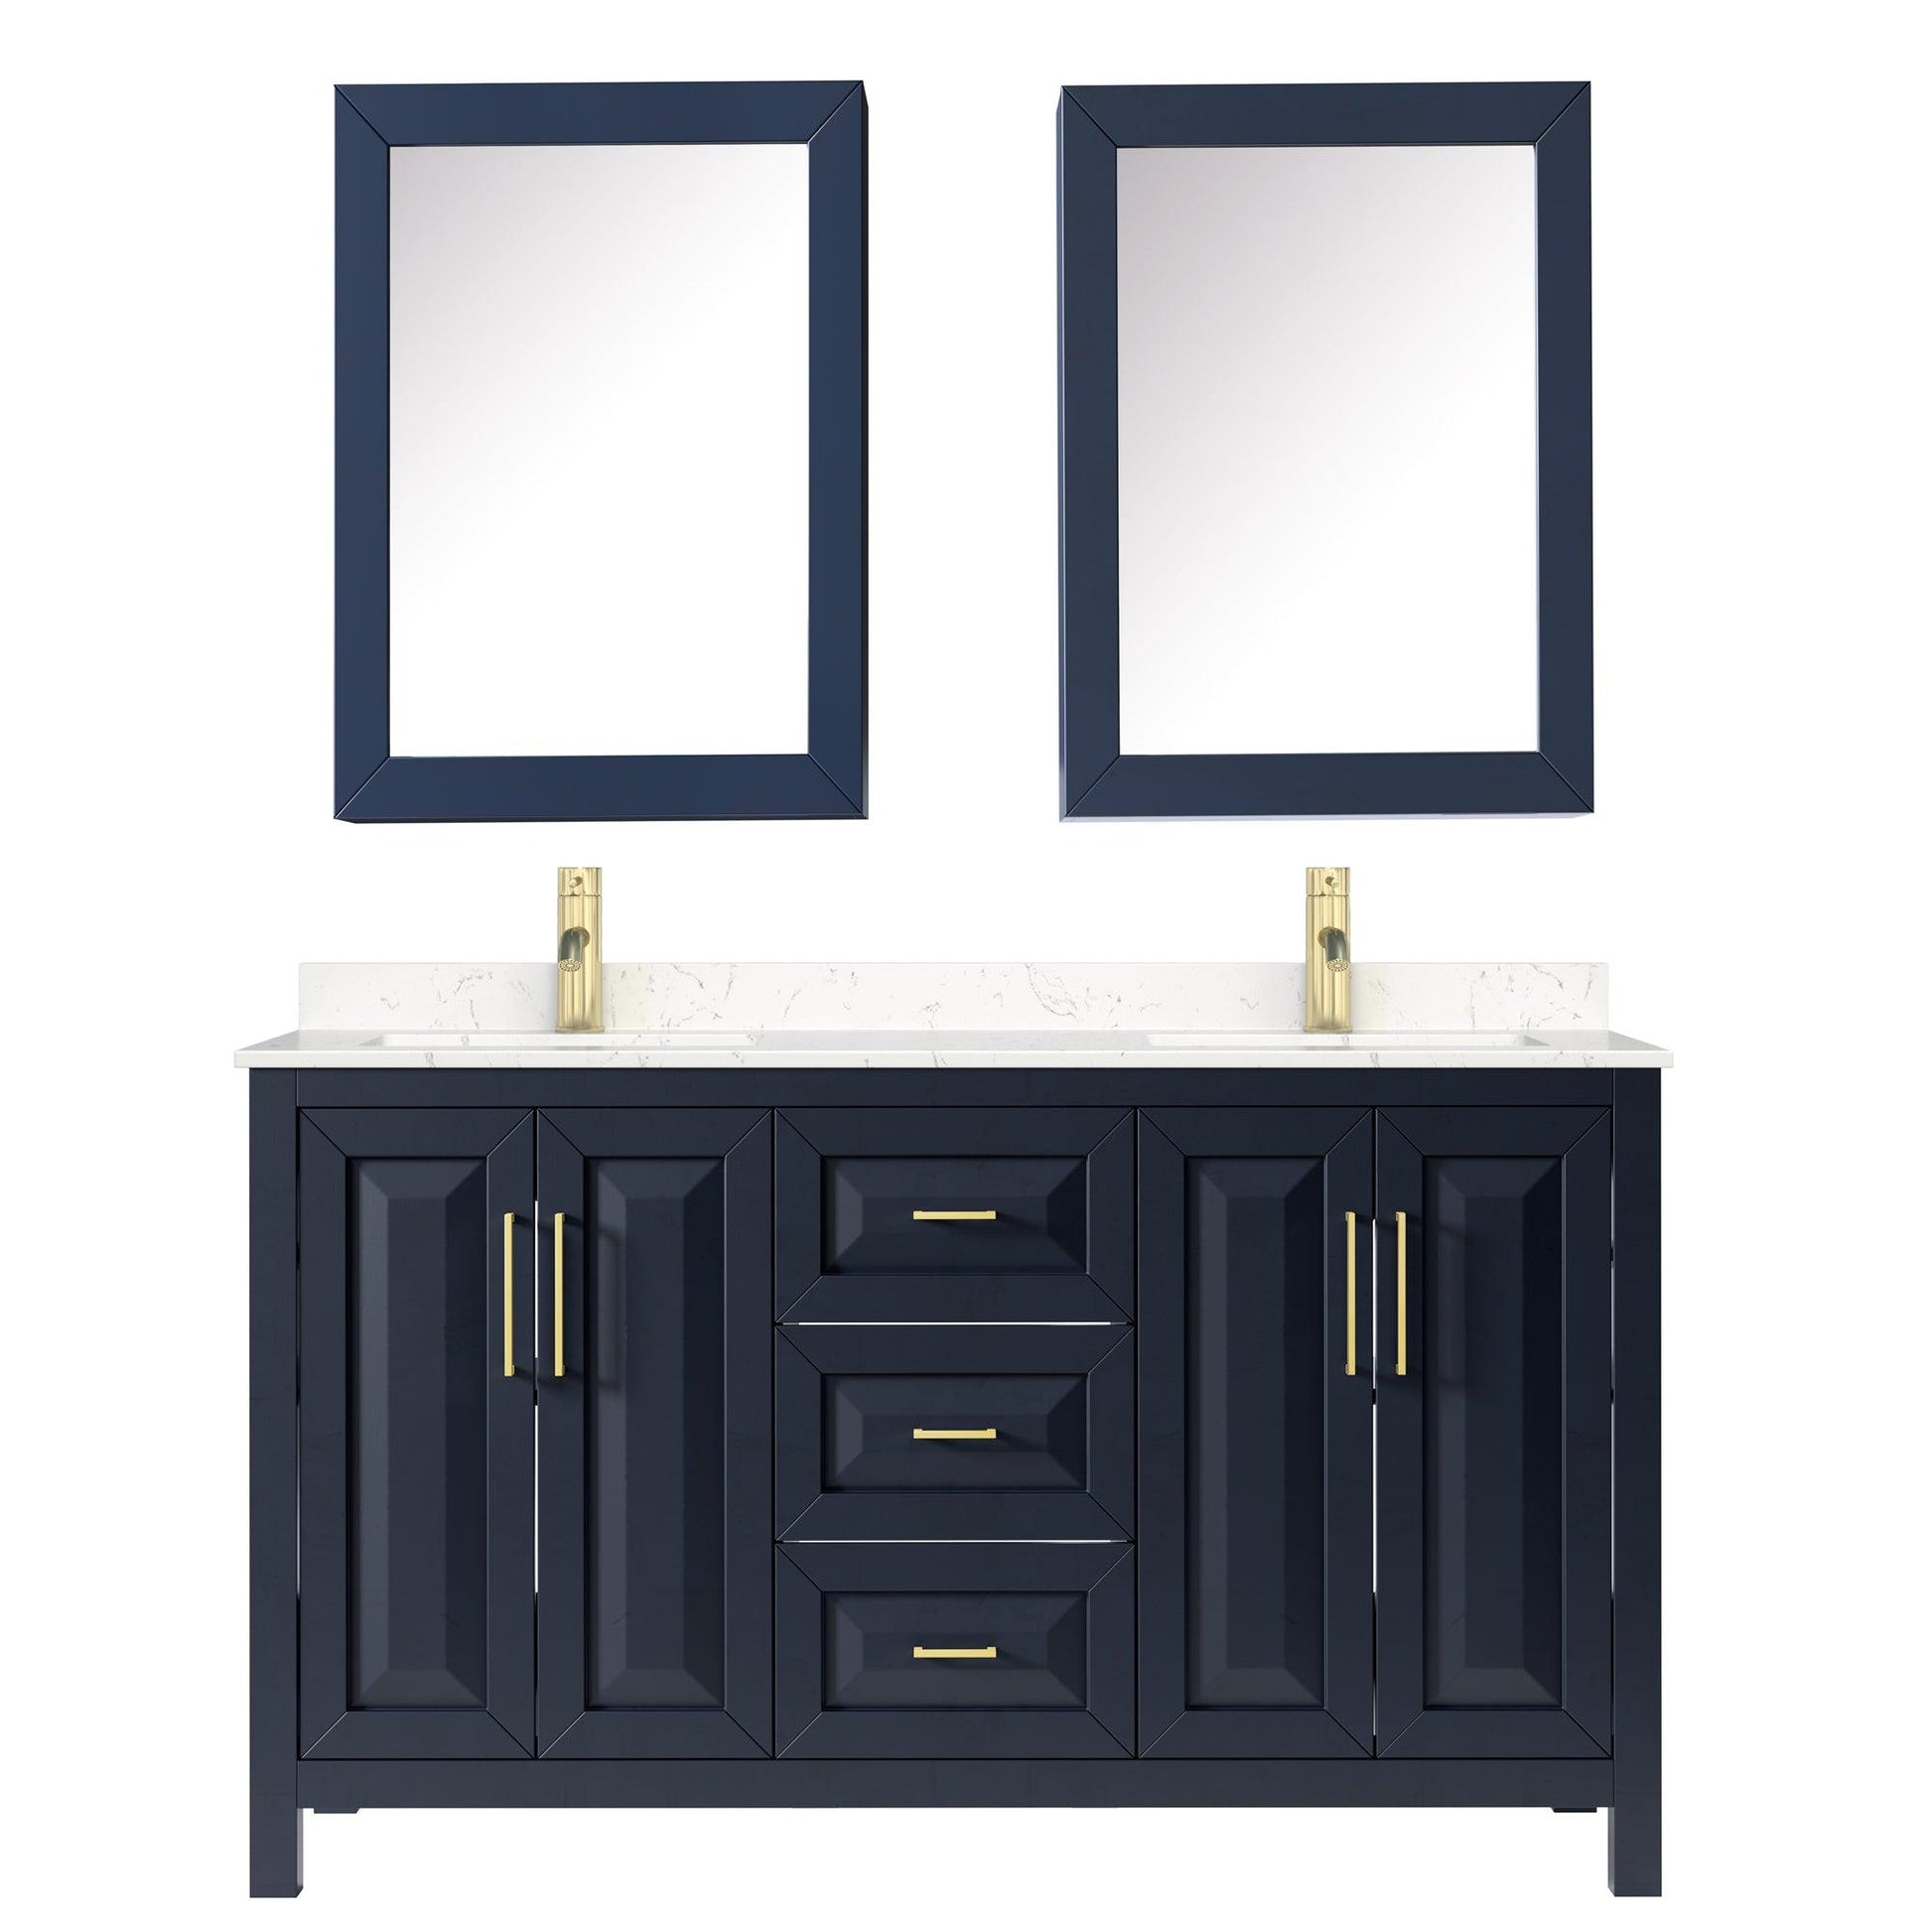 
  
  Wyndham Collection Daria Double Bathroom Vanity with Light-Vein Carrara Cultured Marble Countertop, Undermount Square Sinks, and Optional Mirror/Medicine Cabinet
  
